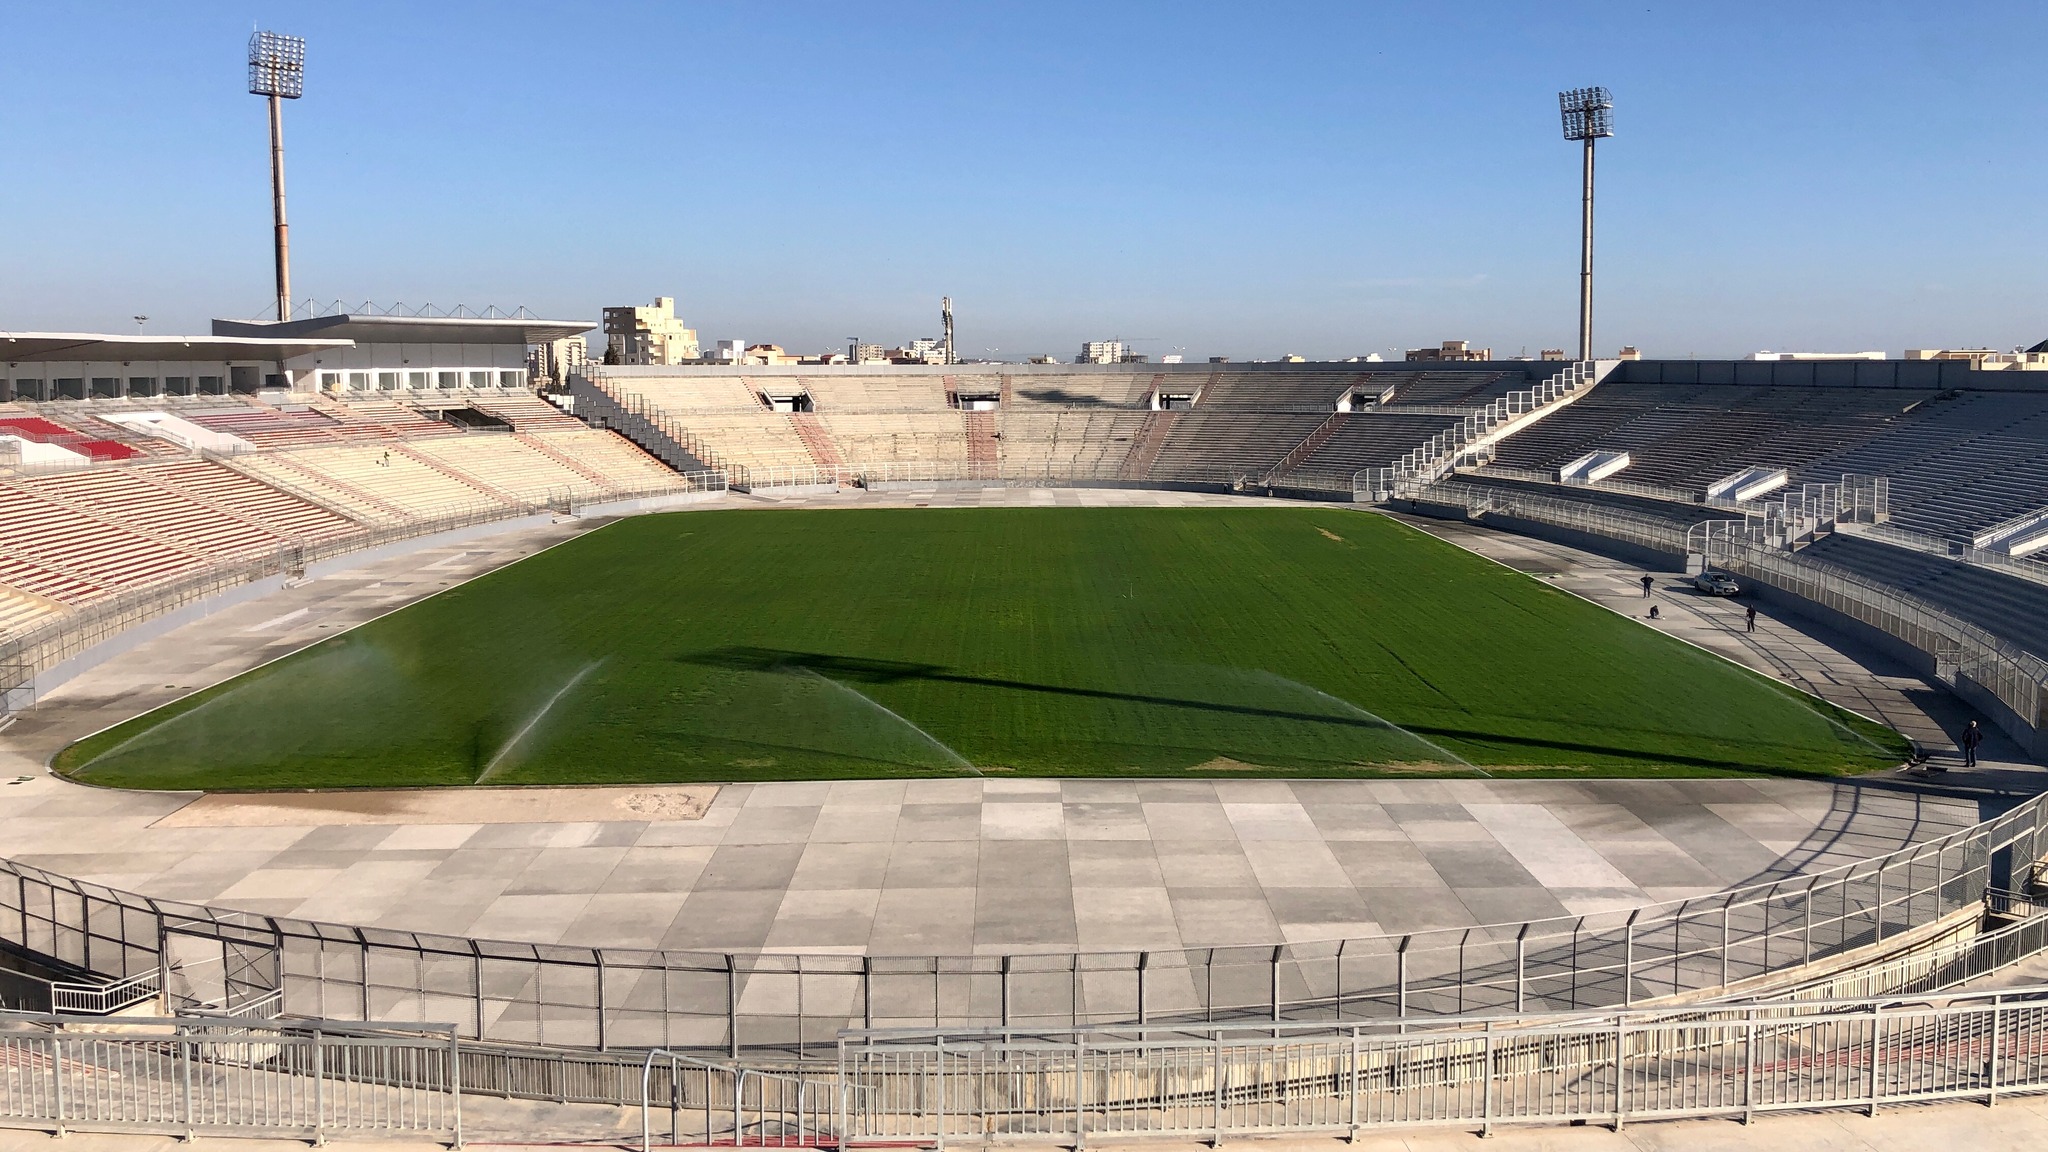 StadeOlympiquedeSousse-苏塞奥林匹克体育场-2-StadeOlympiquedeSousse